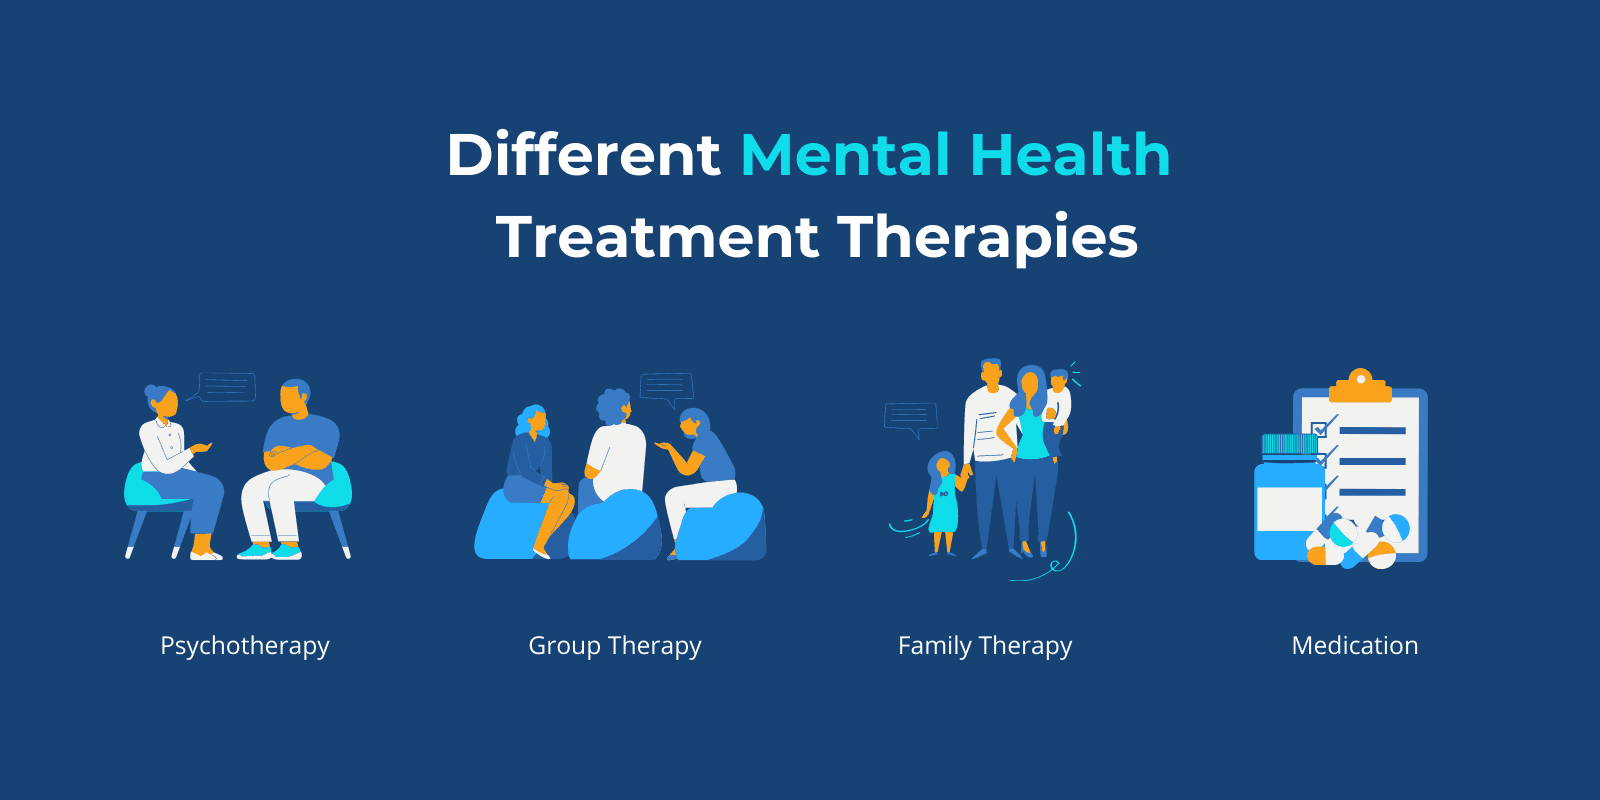 Psychotherapy, group therapy, family therapy, medication with icons